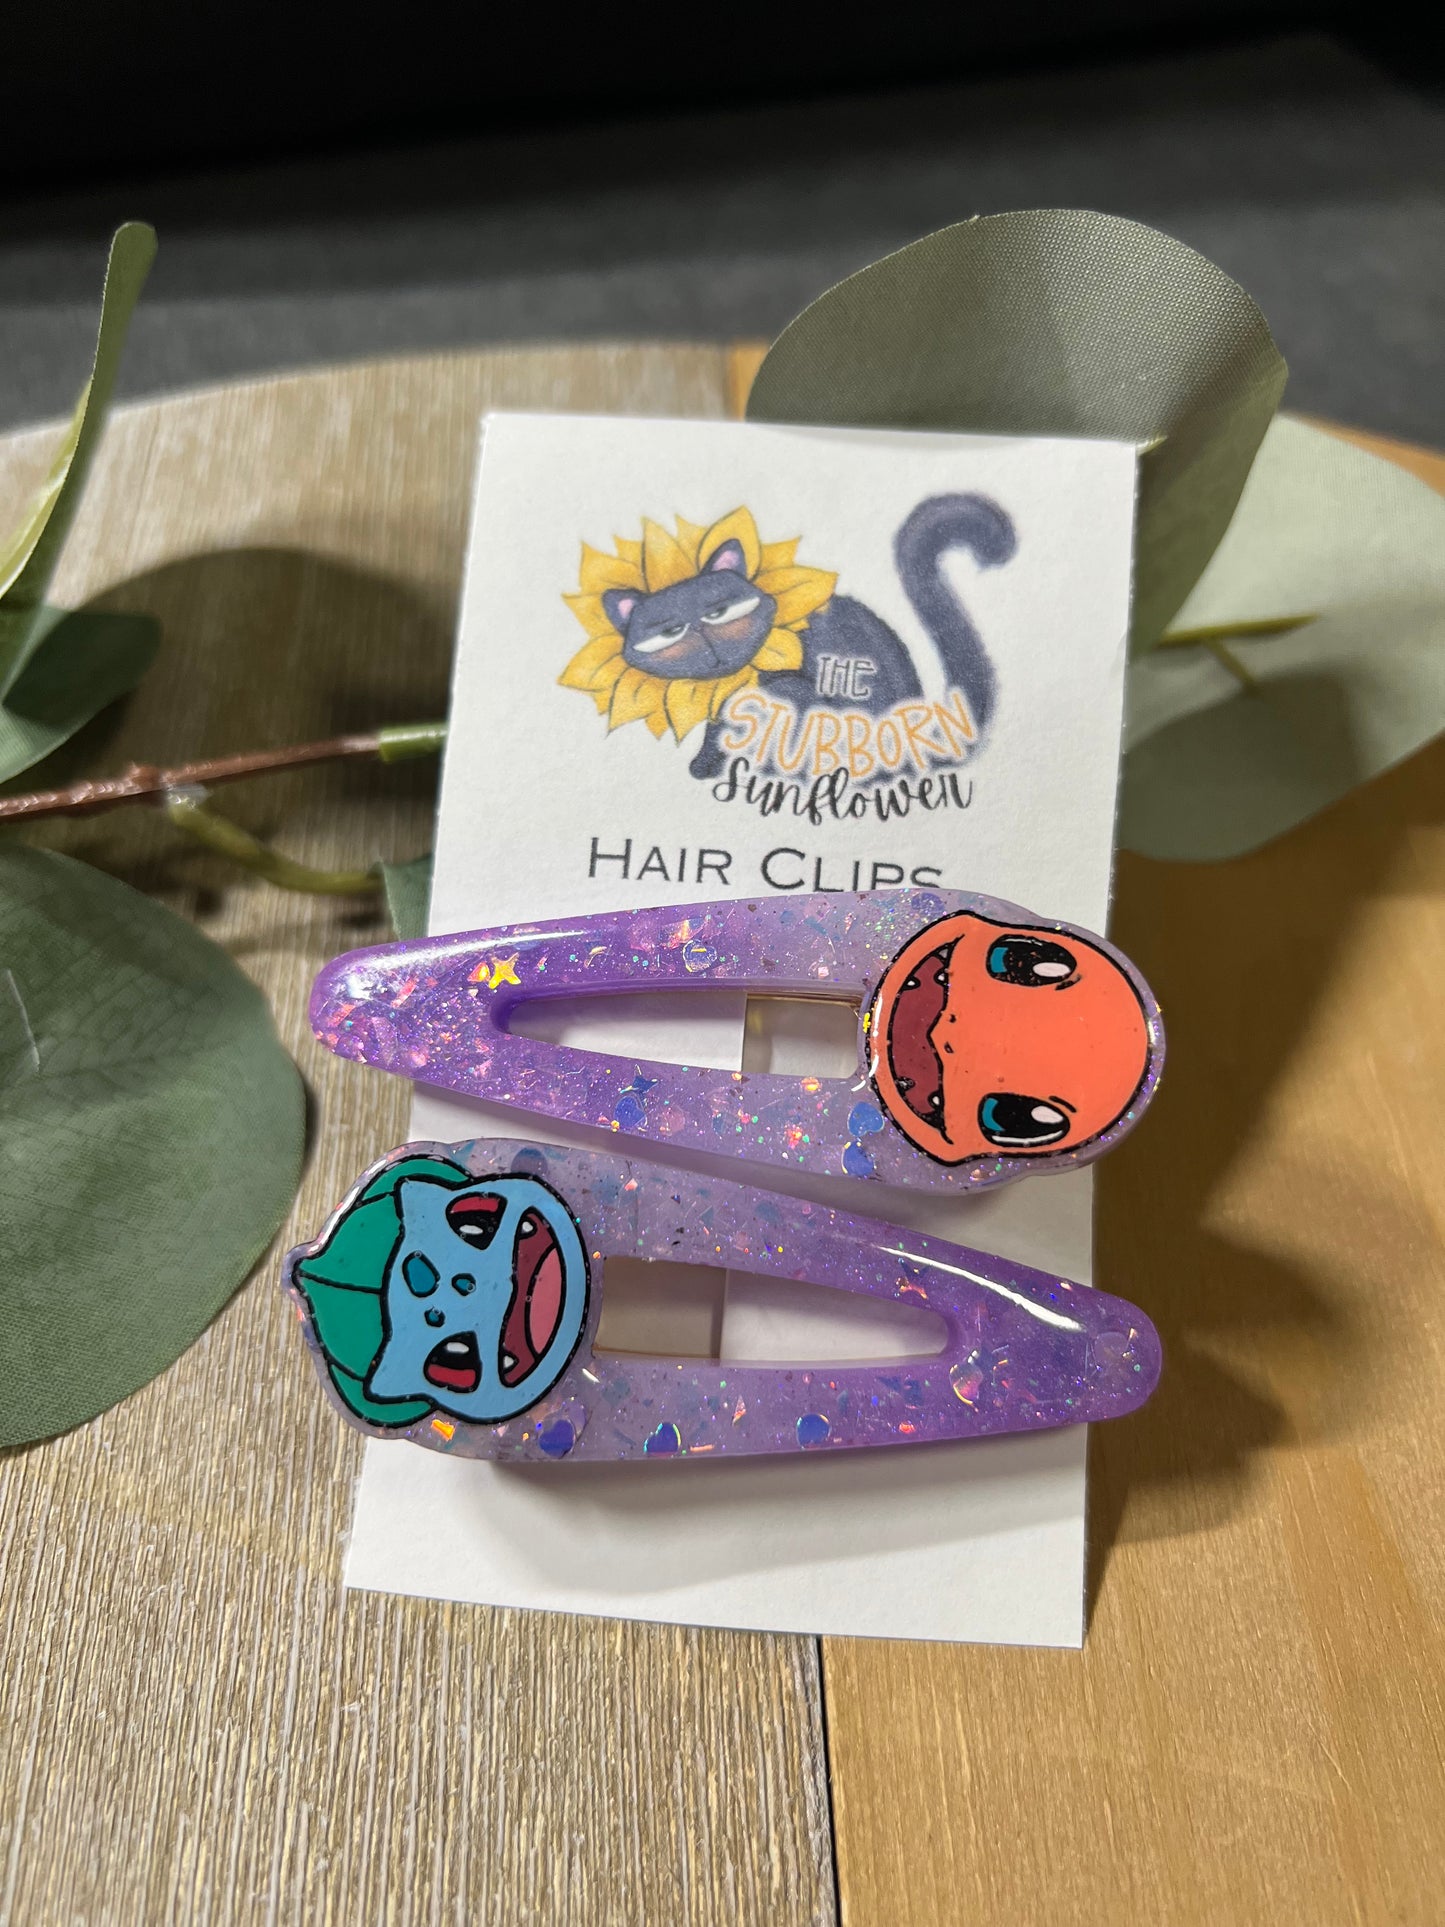 Pocket Monsters Hair Clips